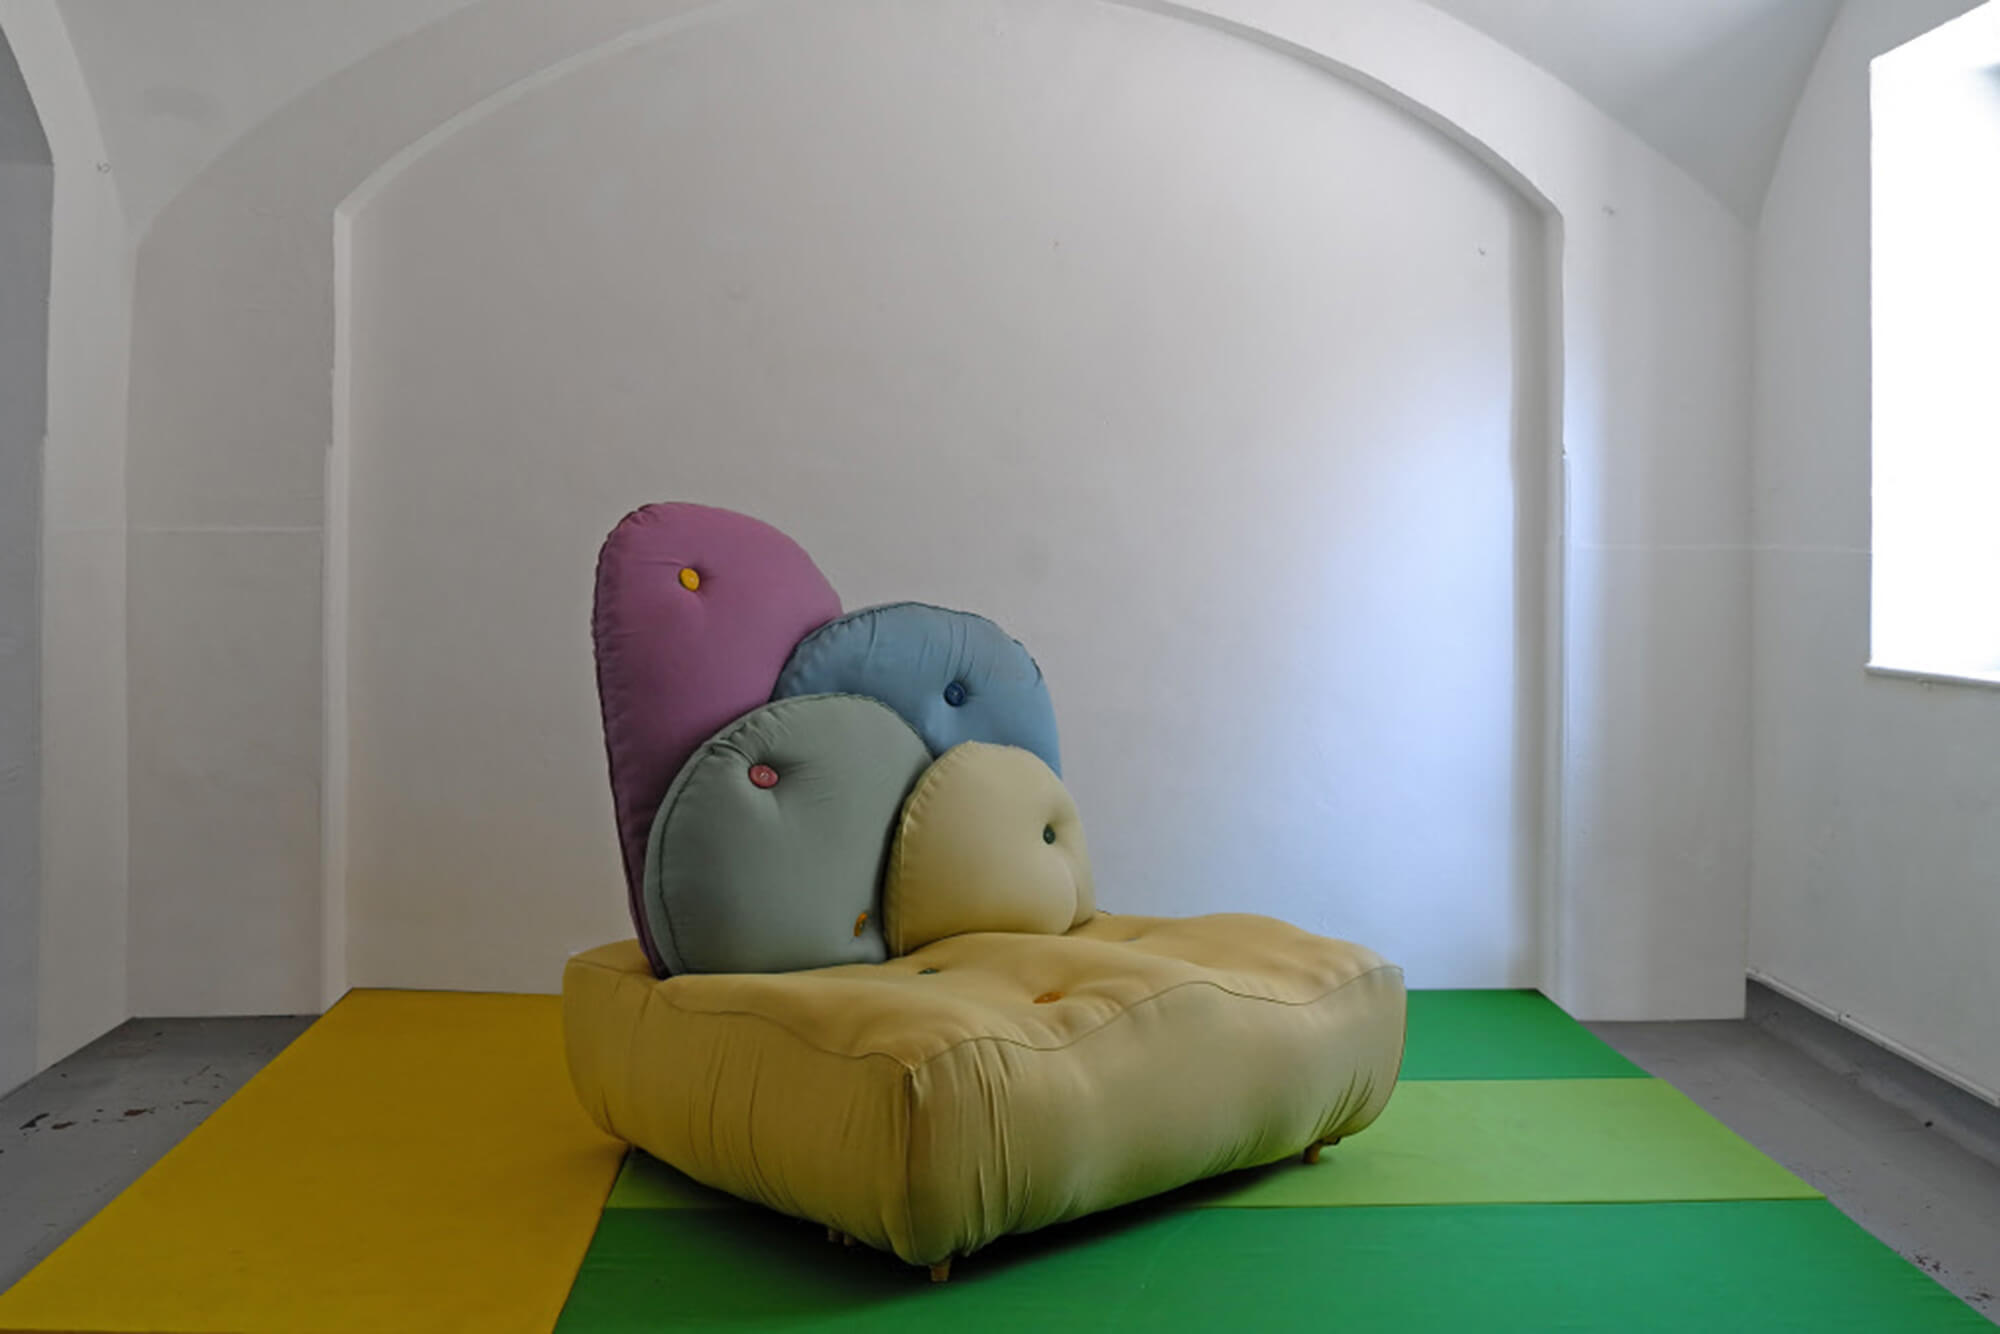 Contemporary sofa by Nacho Carbonell featuring pastel colors of Sunbrella fabrics